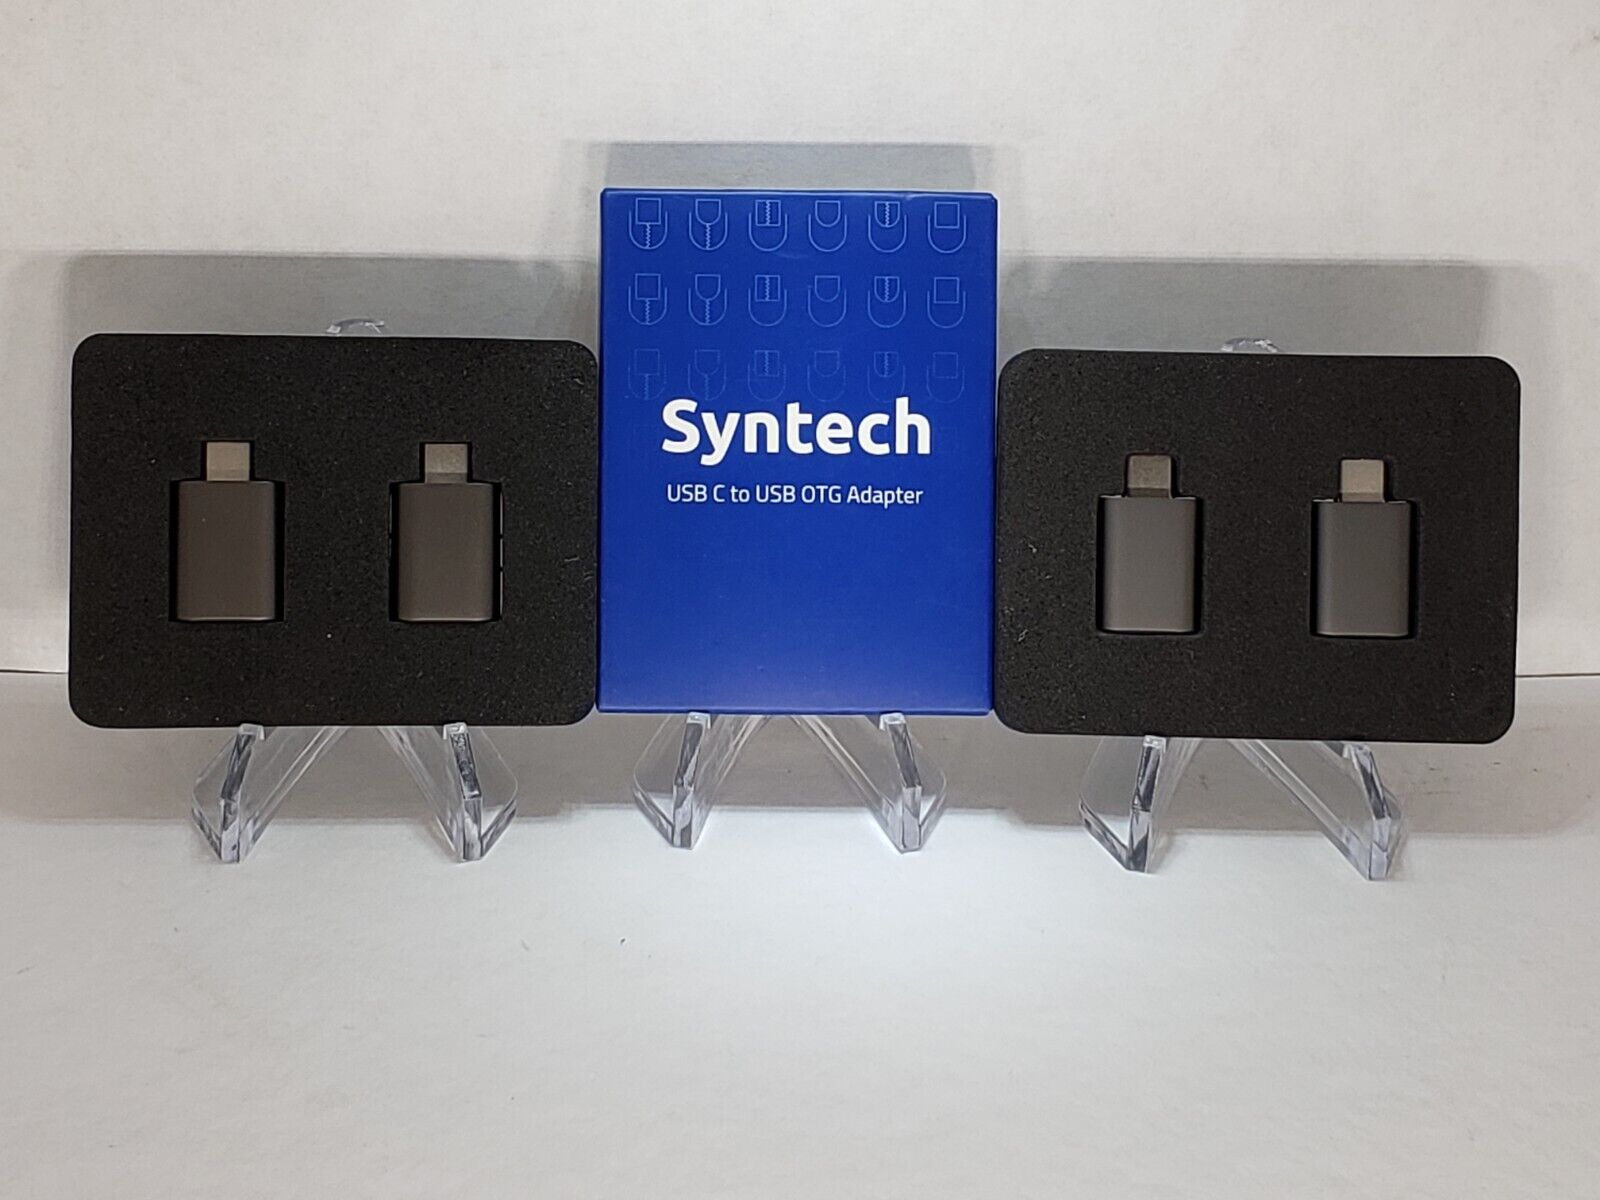 Syntech Adapter USB C to USB OTG - 2 Boxes (4 Adapters) 